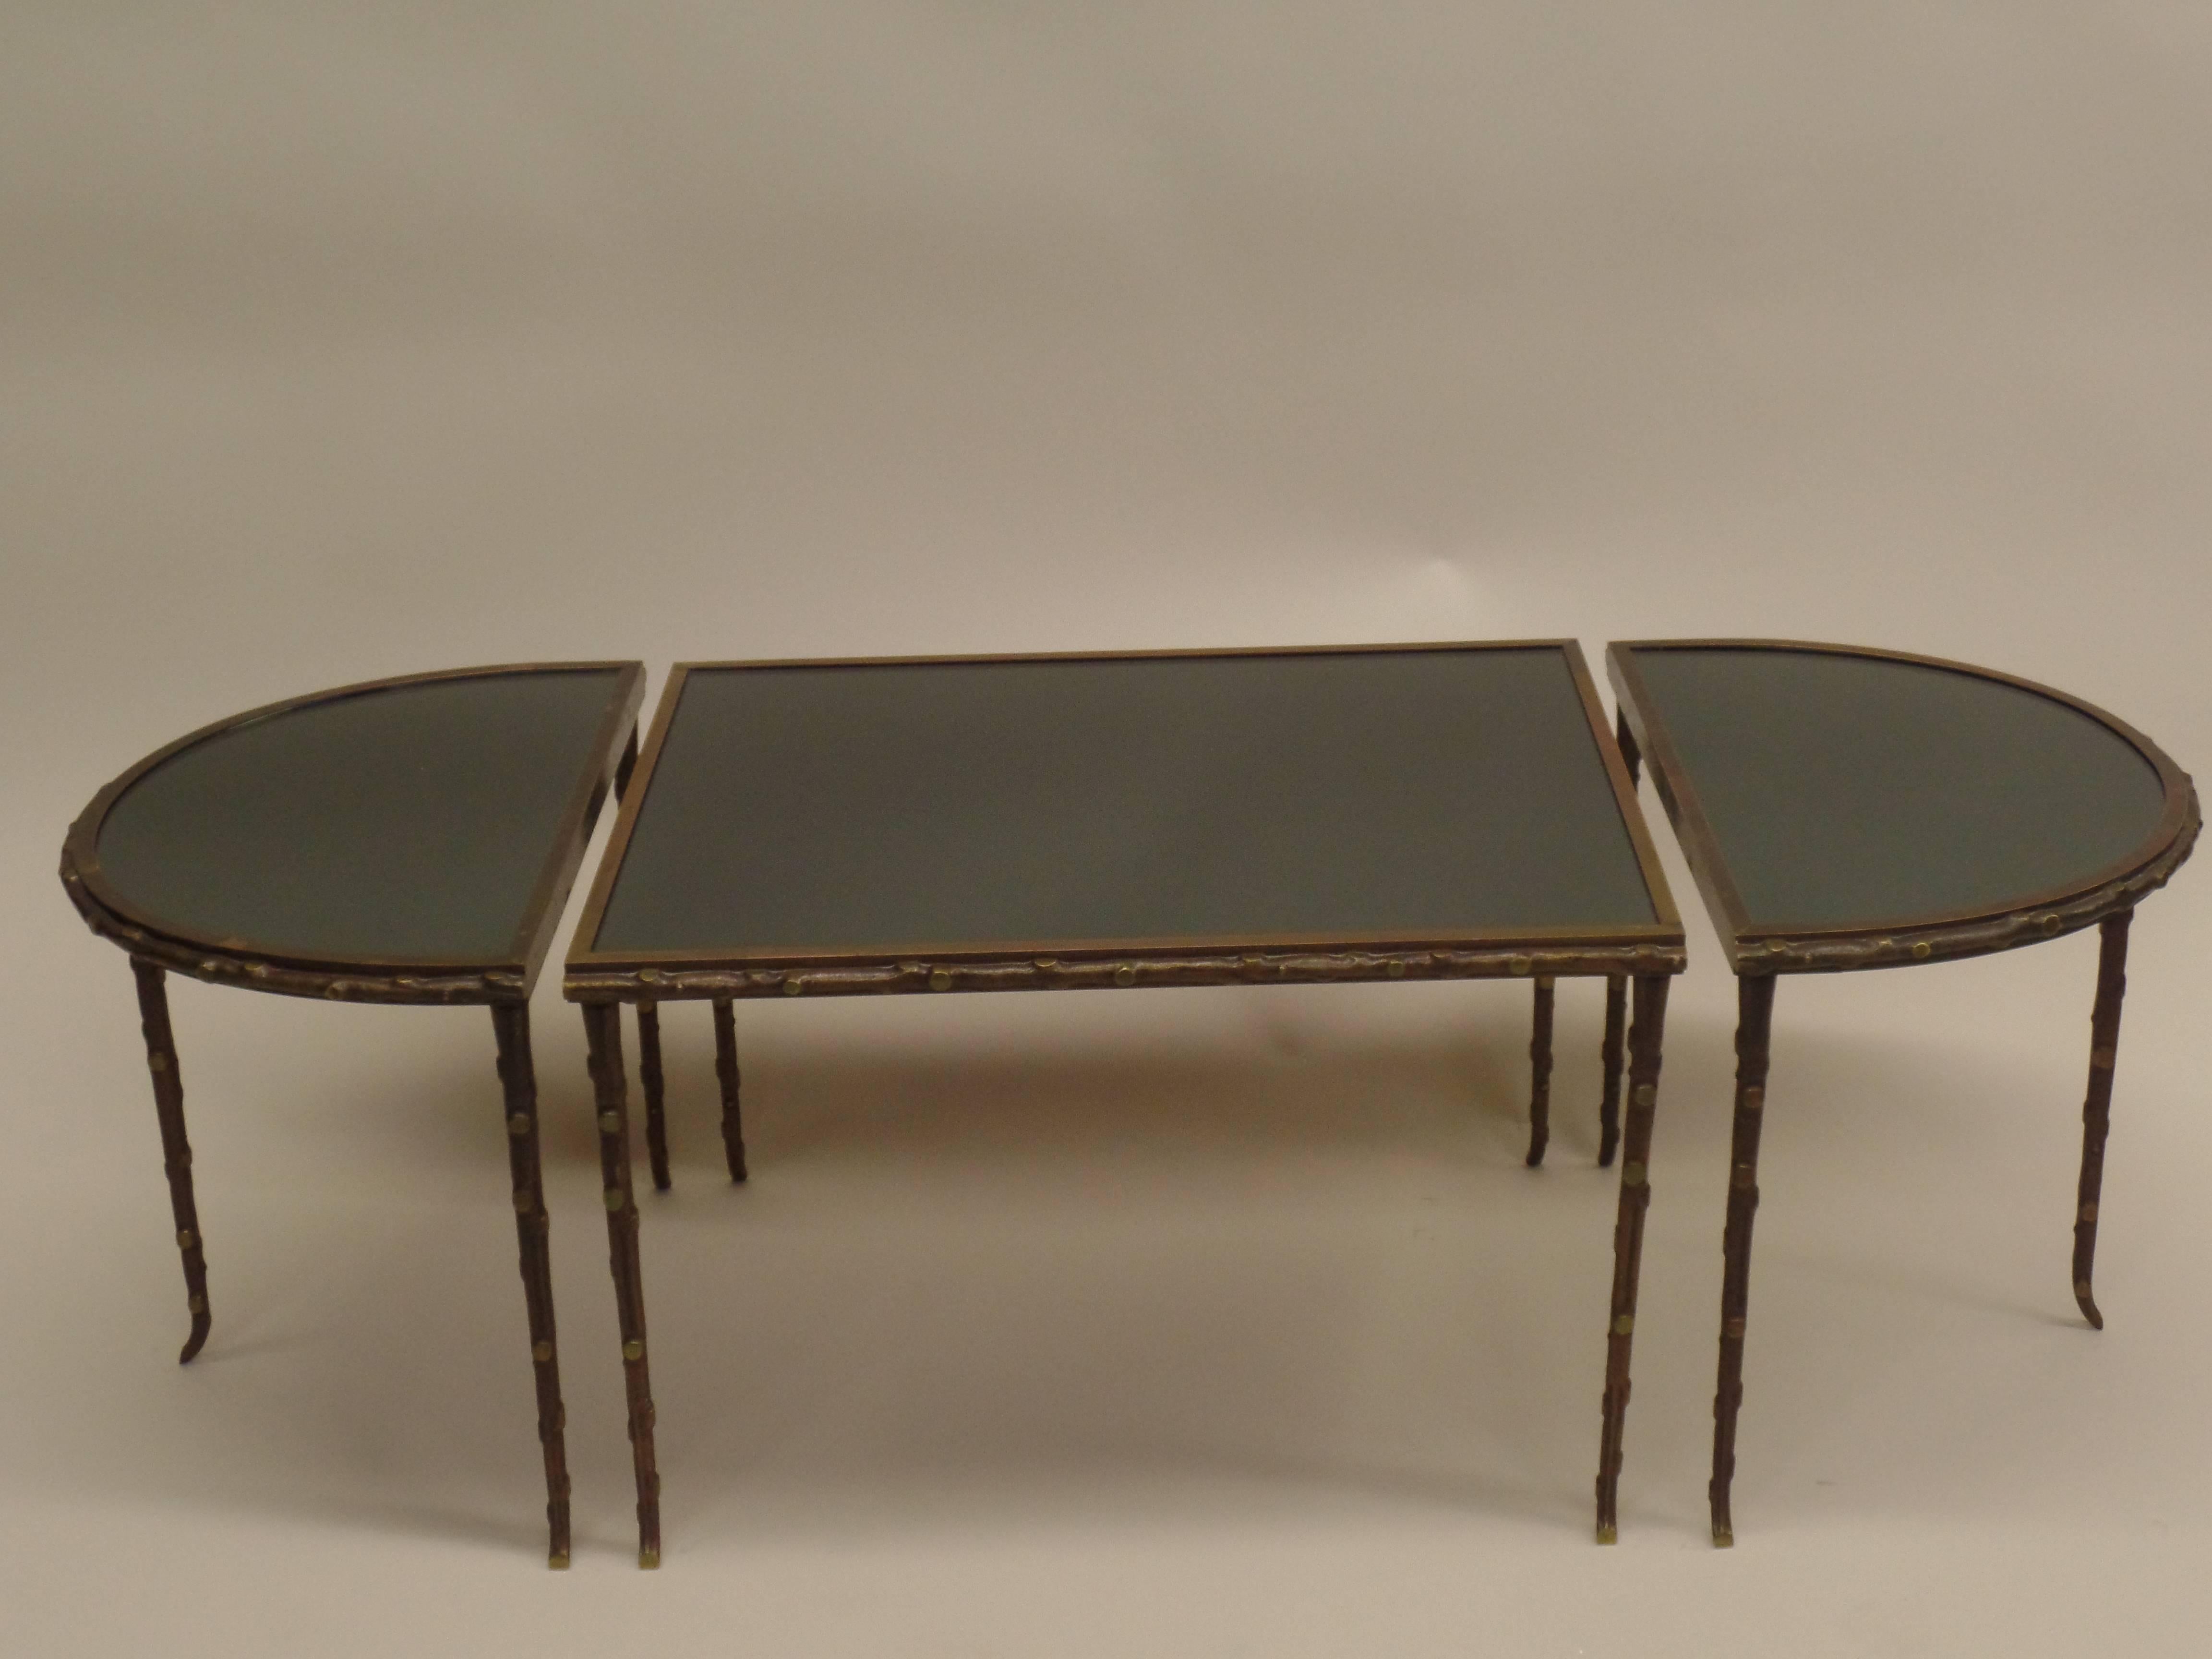 Important French midcentury cocktail table by Maison Baguès in the modern neoclassical taste. The table is composed of three parts that can separate and be used according to size and application as needed. The piece is made of solid bronze and